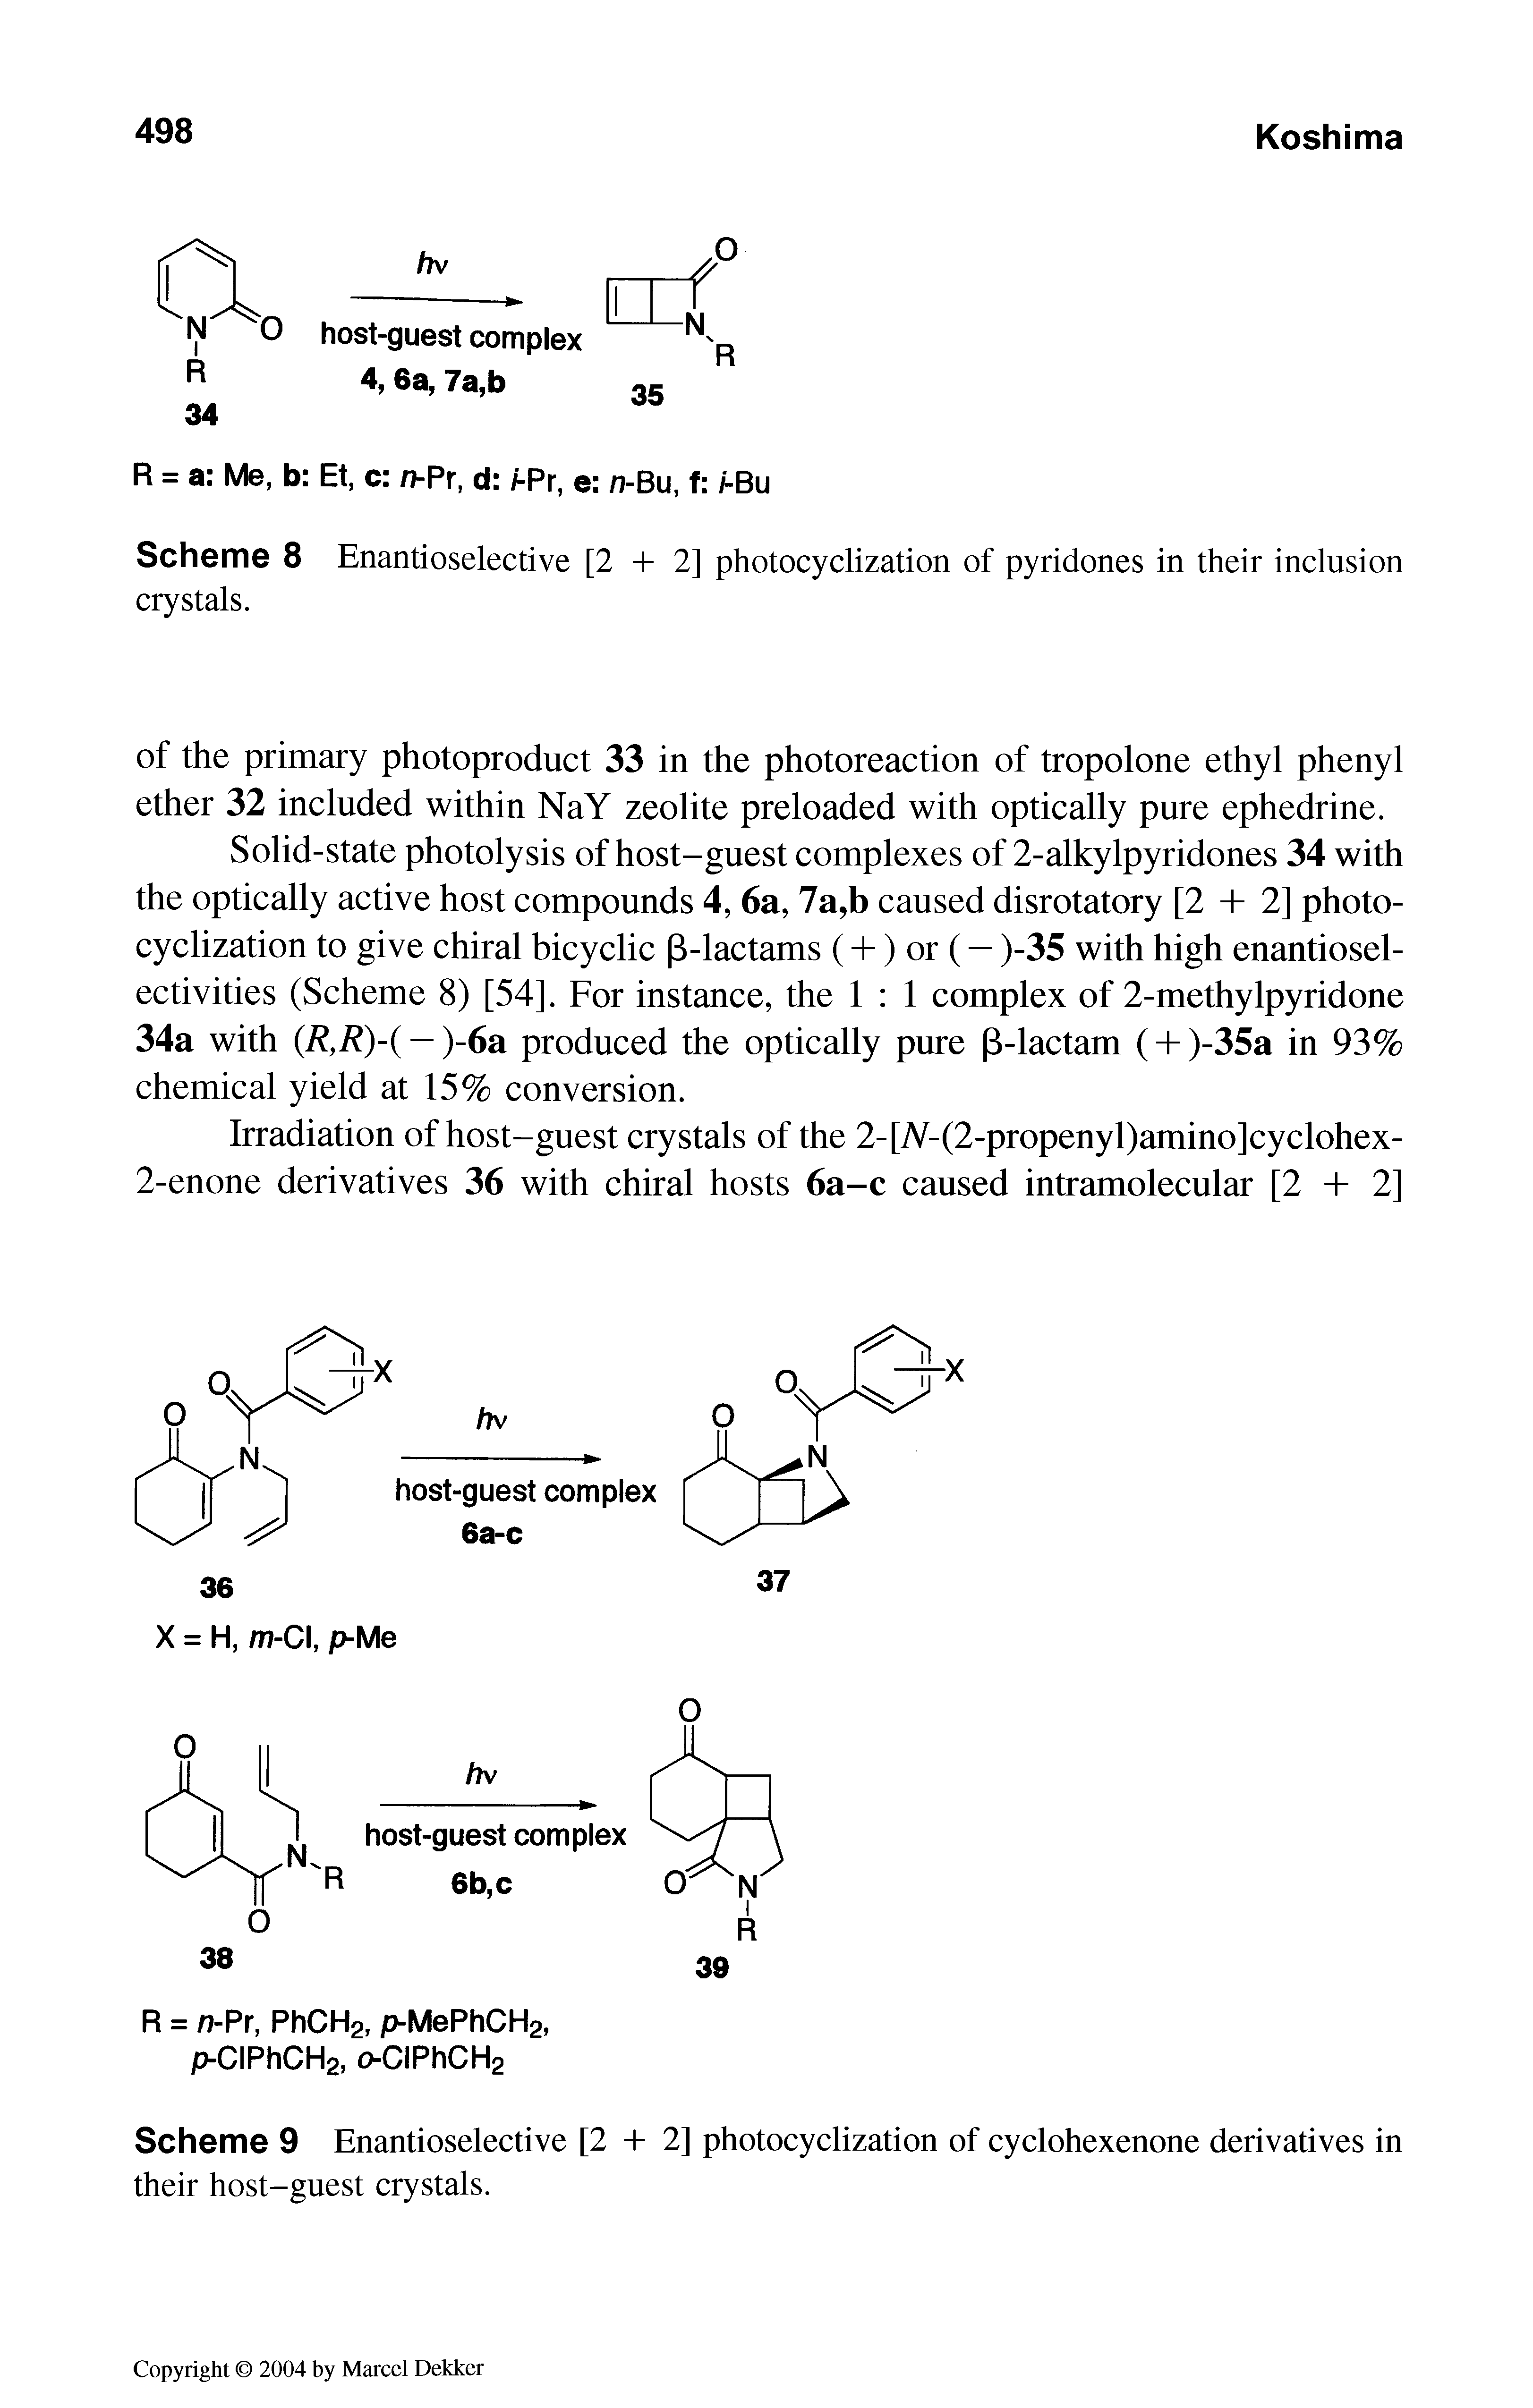 Scheme 8 Enantioselective [2 + 2] photocyclization of pyridones in their inclusion crystals.